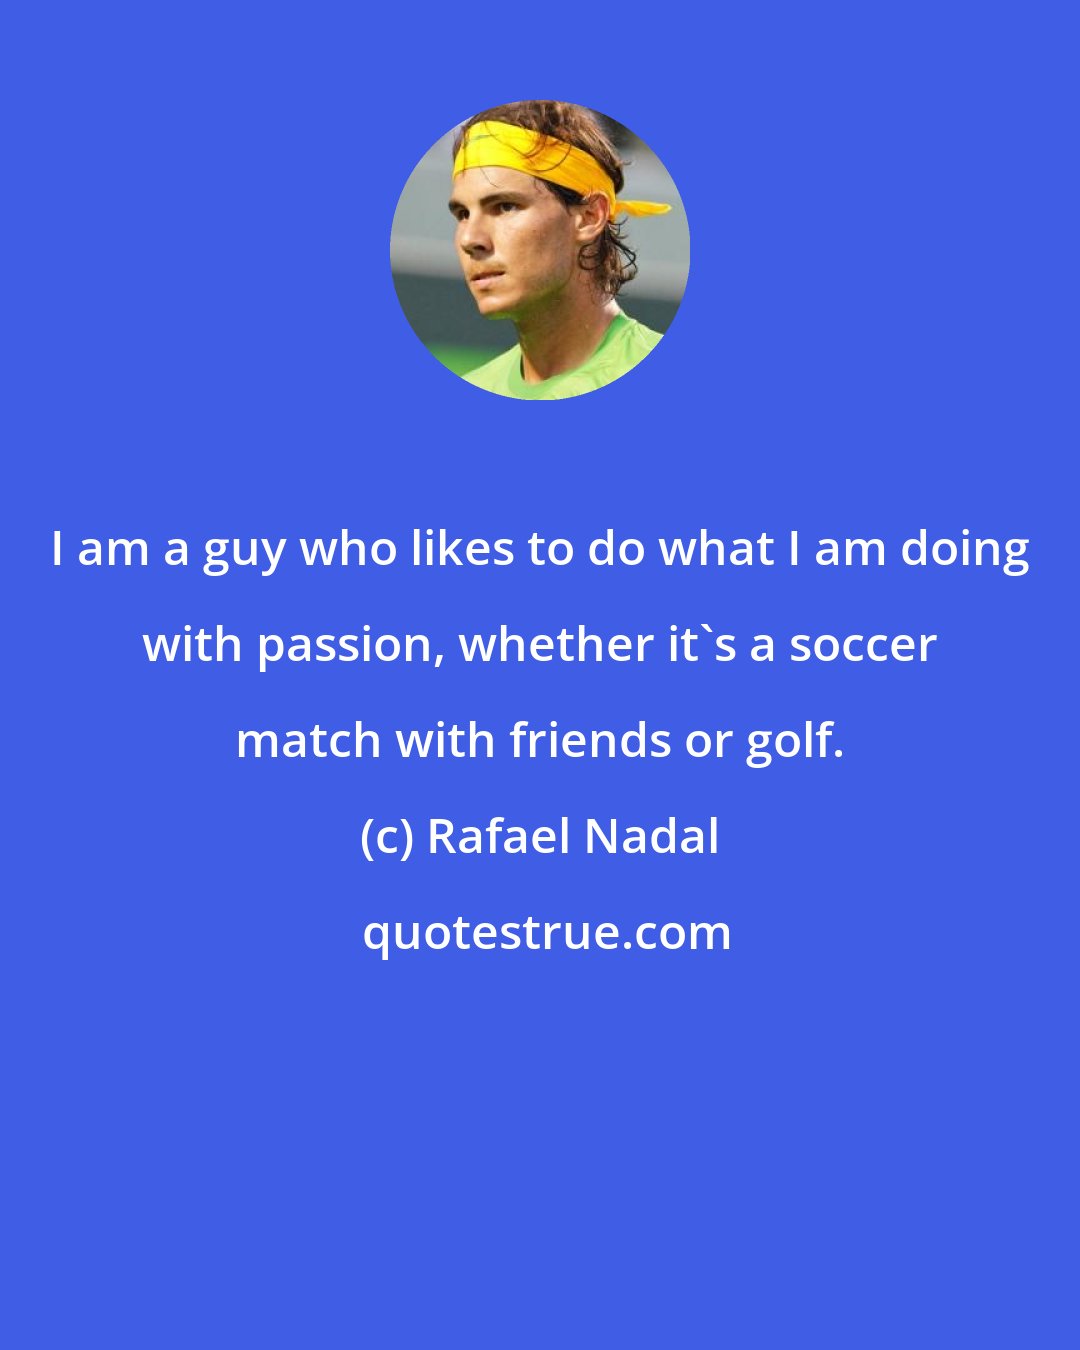 Rafael Nadal: I am a guy who likes to do what I am doing with passion, whether it's a soccer match with friends or golf.